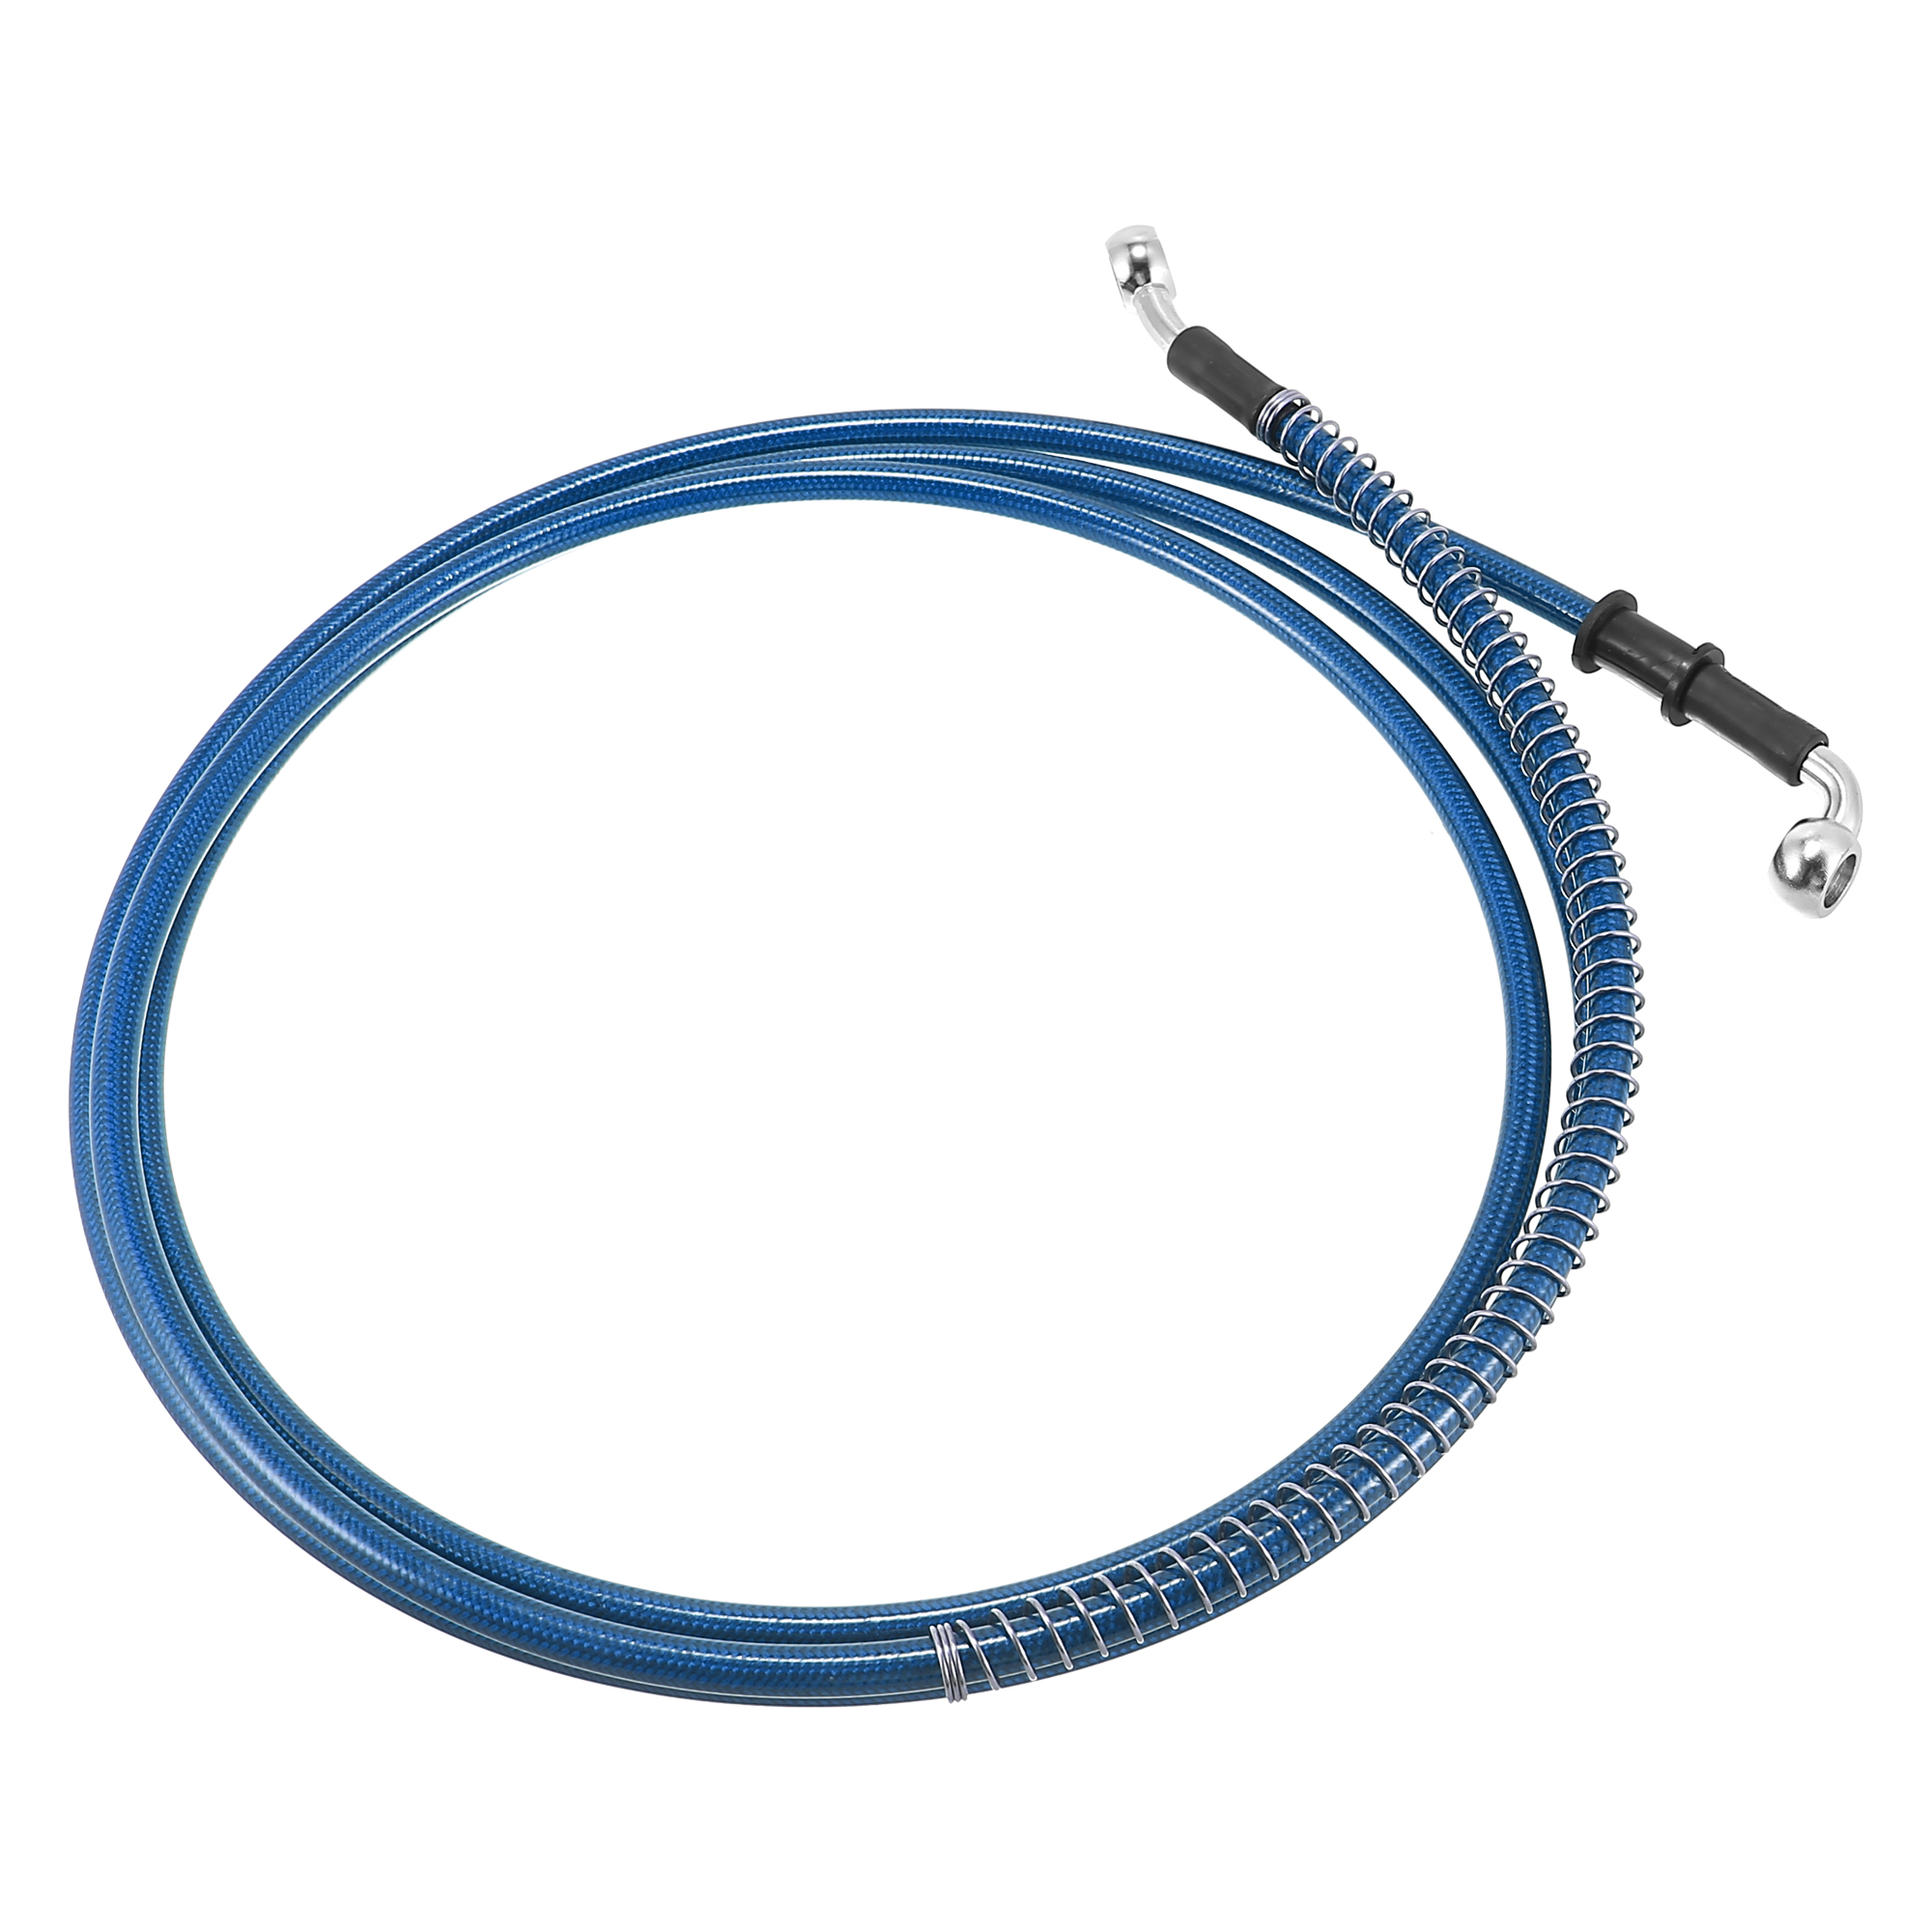 Unique Bargains 240cm 94.49" Brake Clutch Oil Hose Line Pipe Hydraulic Blue for Motorcycle